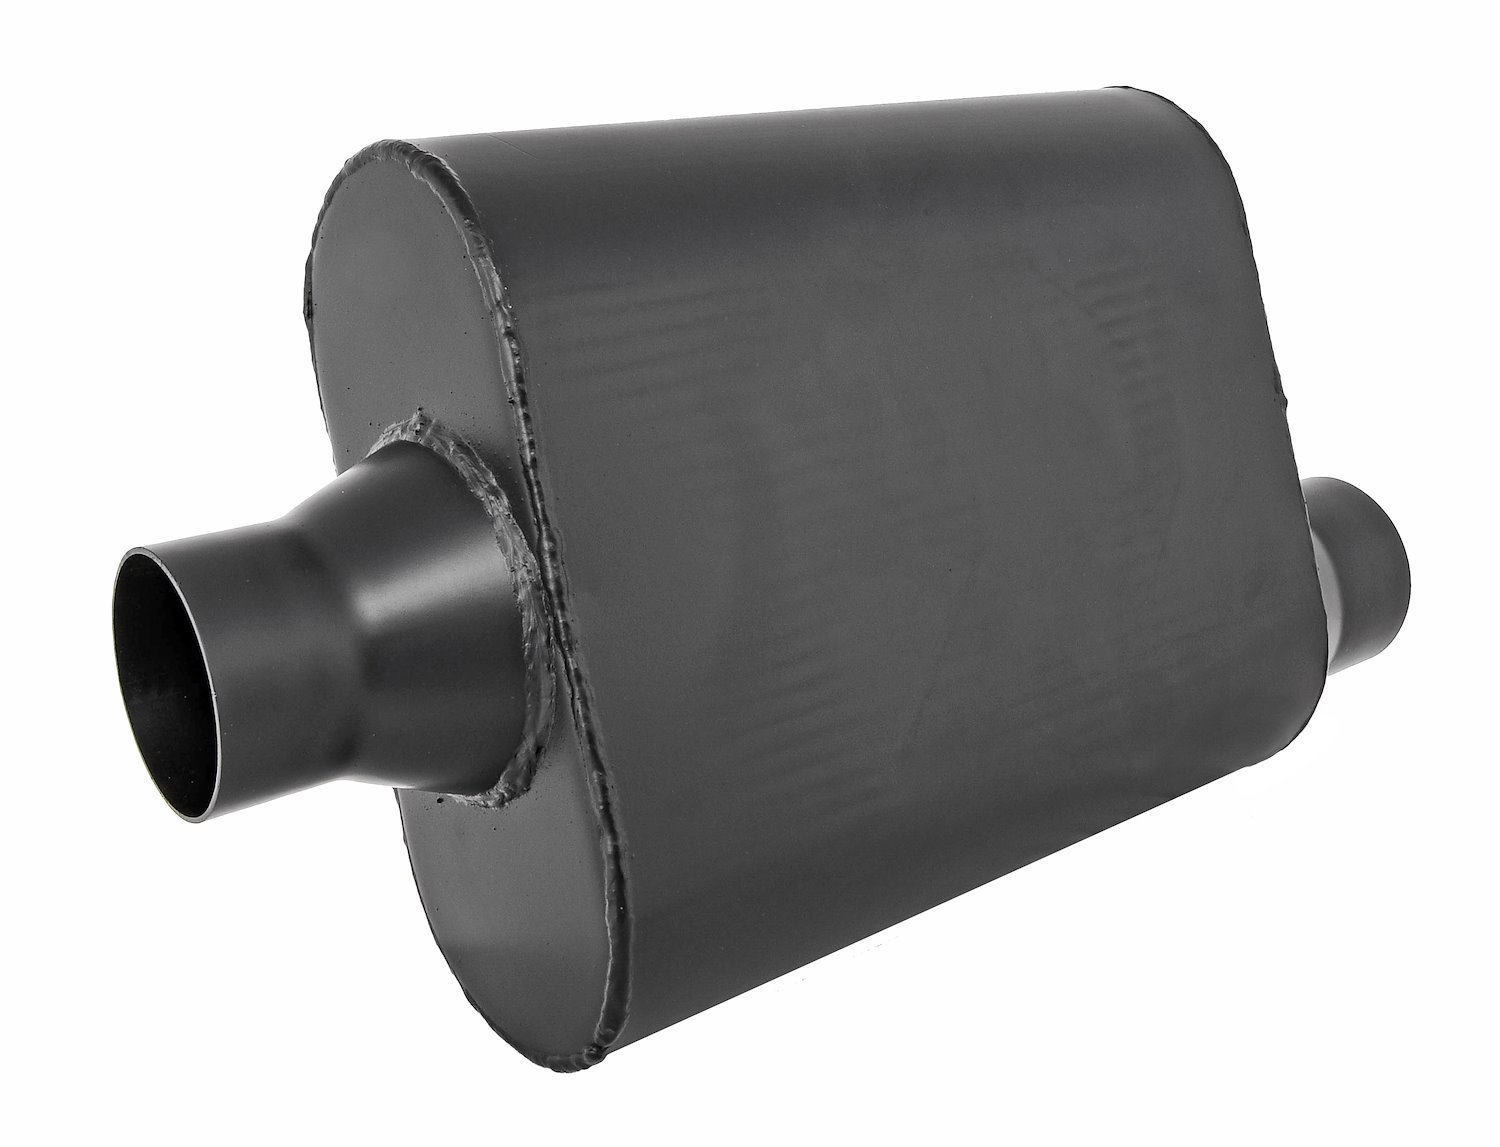 Chambered Deep-Tone Muffler 2.500 in. Offset Inlet / 2.250 in. Centered Outlet